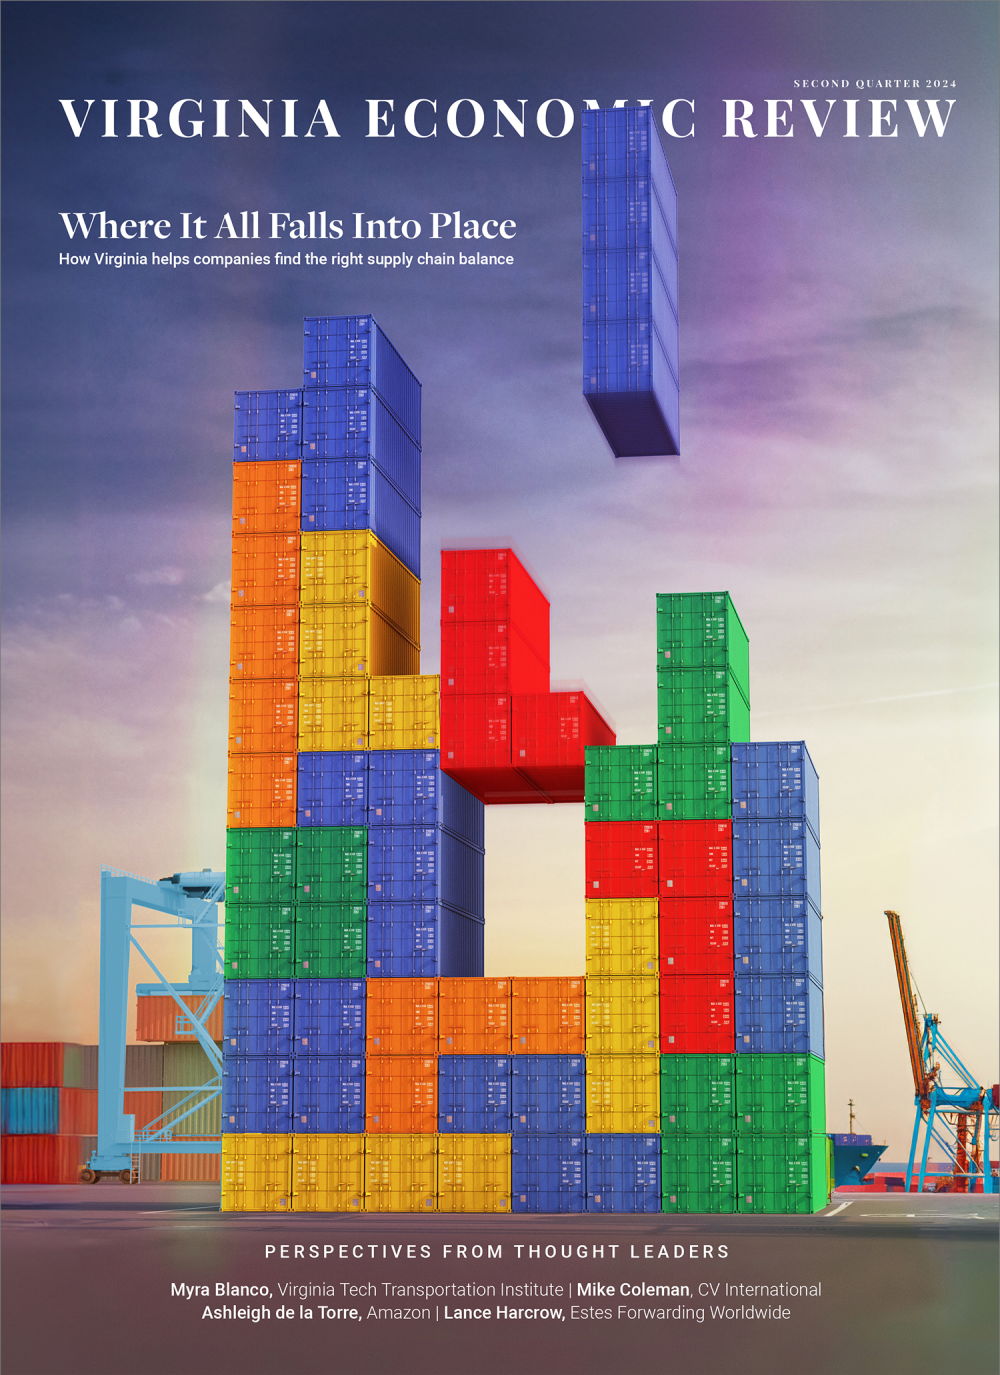 VER Q2 2024 Full Cover Imagery featuring shipping containers in a puzzle format